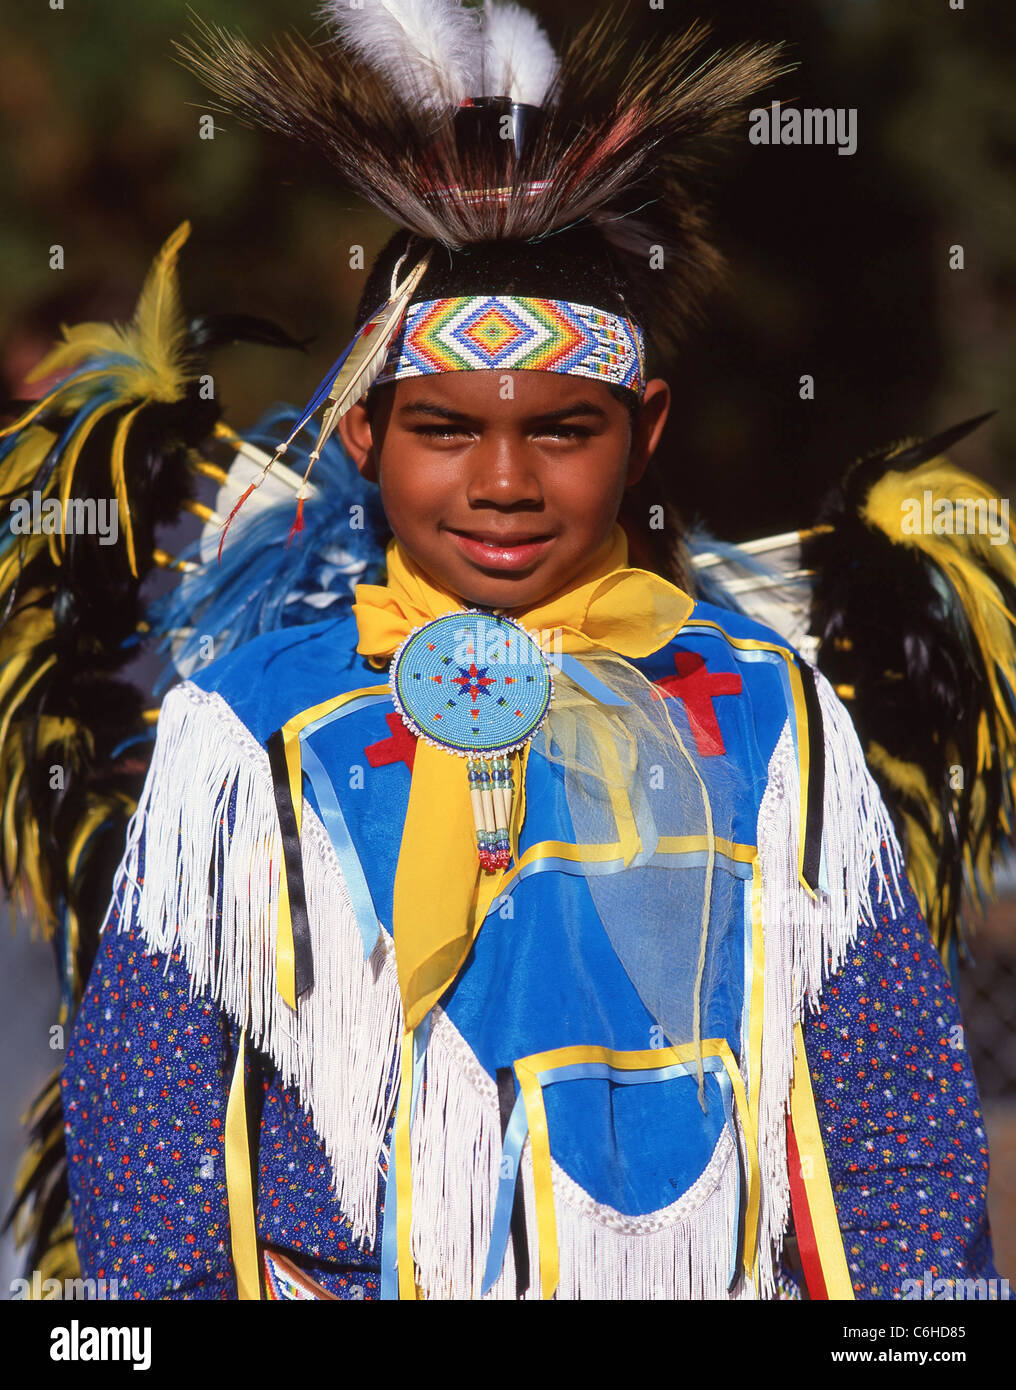 Boy dressed as native American Indian, Nevada, United States of America Stock Photo